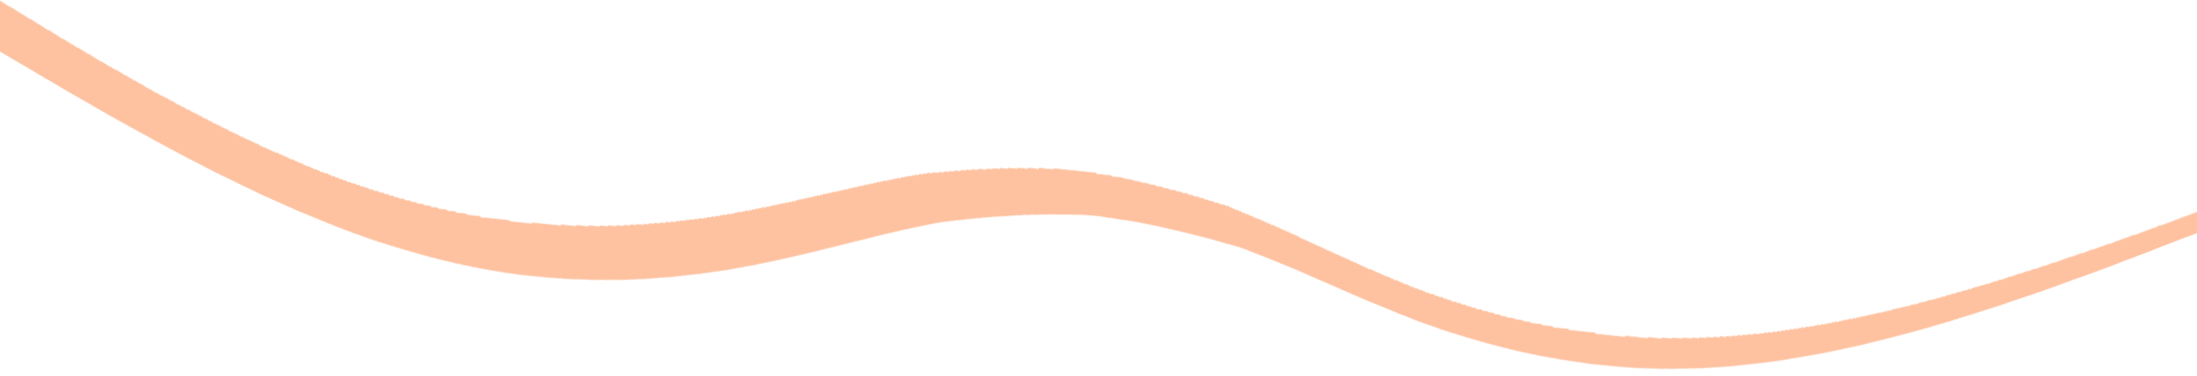 wave-bottom-border-left-to-right